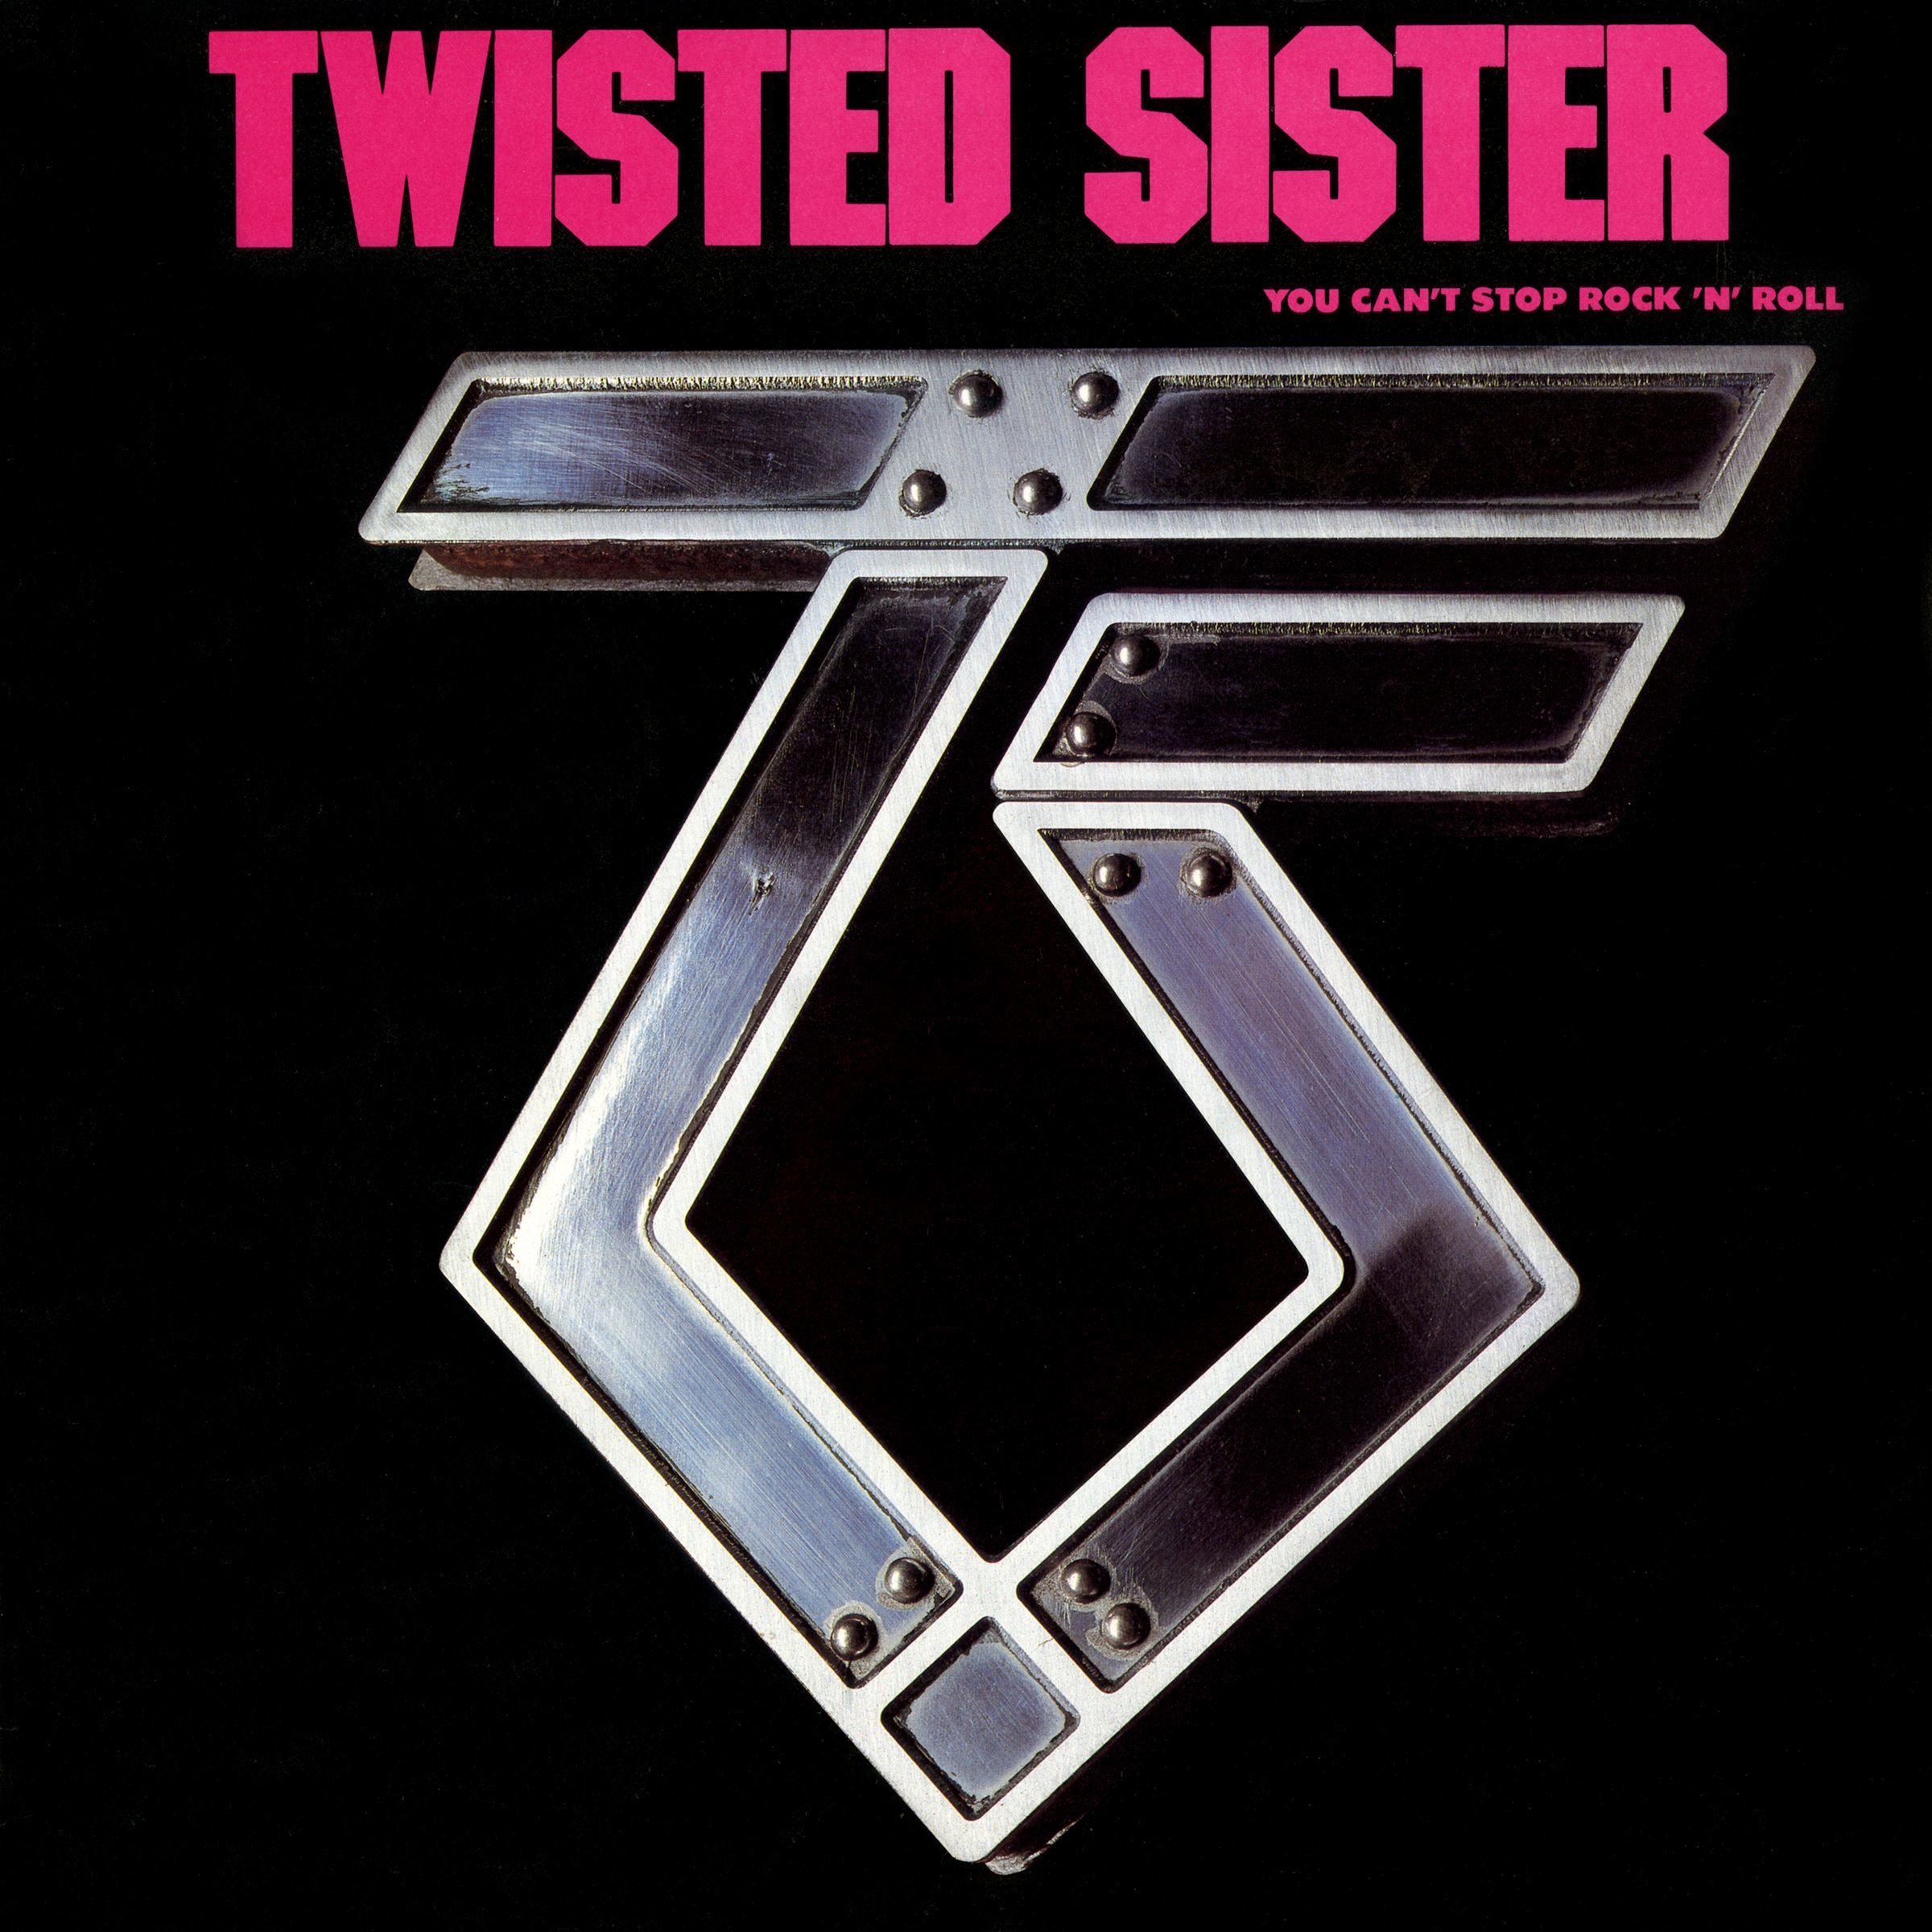 Twisted Sister – You Can’t Stop Rock ‘N’ Roll